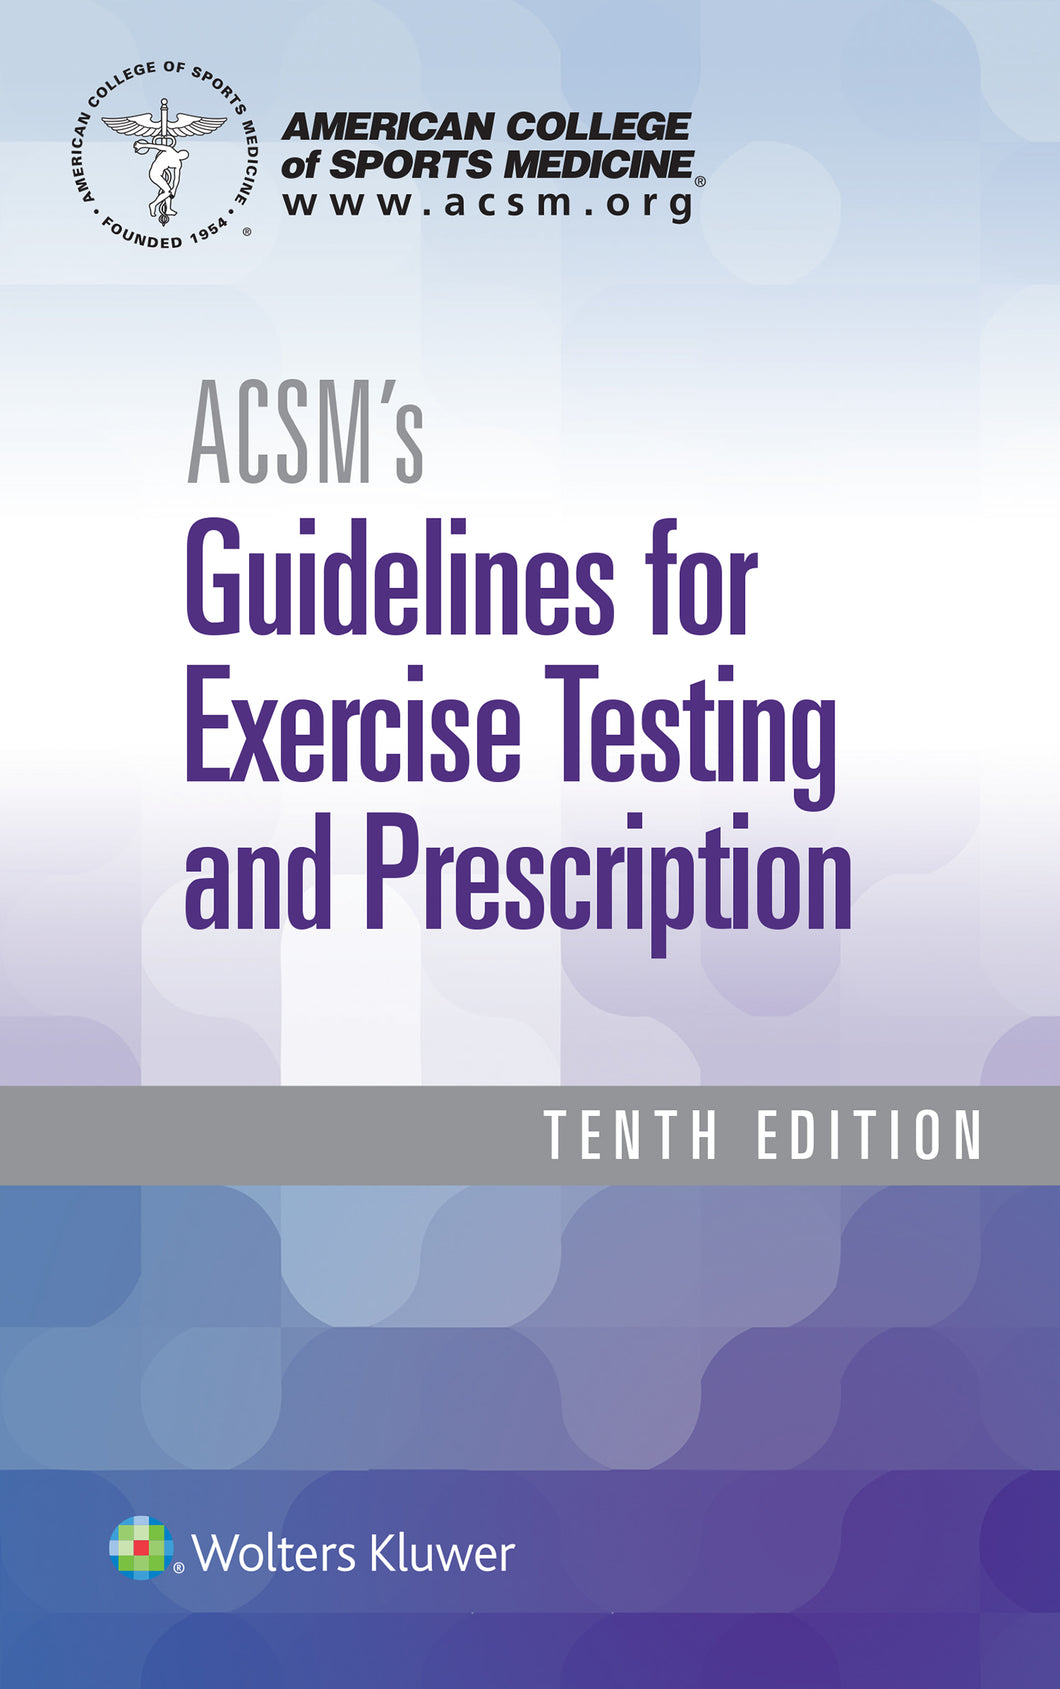 ACSM's Guidelines for Exercise Testing and Prescription, 10th ed.